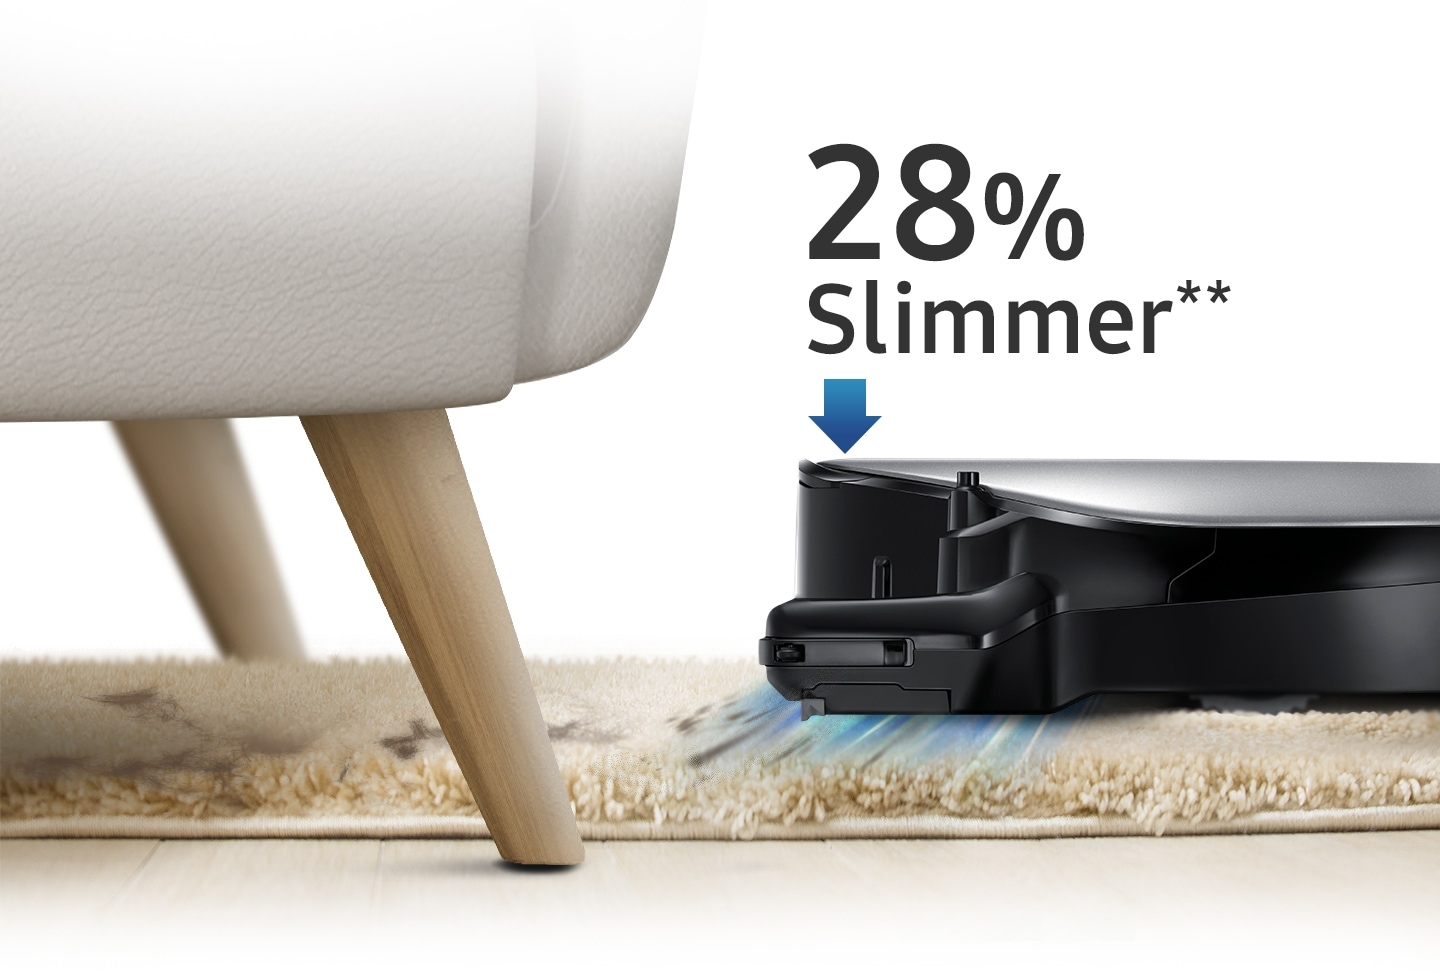 An image showing a POWERbot VR7000 device vacuuming a carpet and cleaning under a sofa, as well as an arrow icon and text that reads '28% slimmer.'